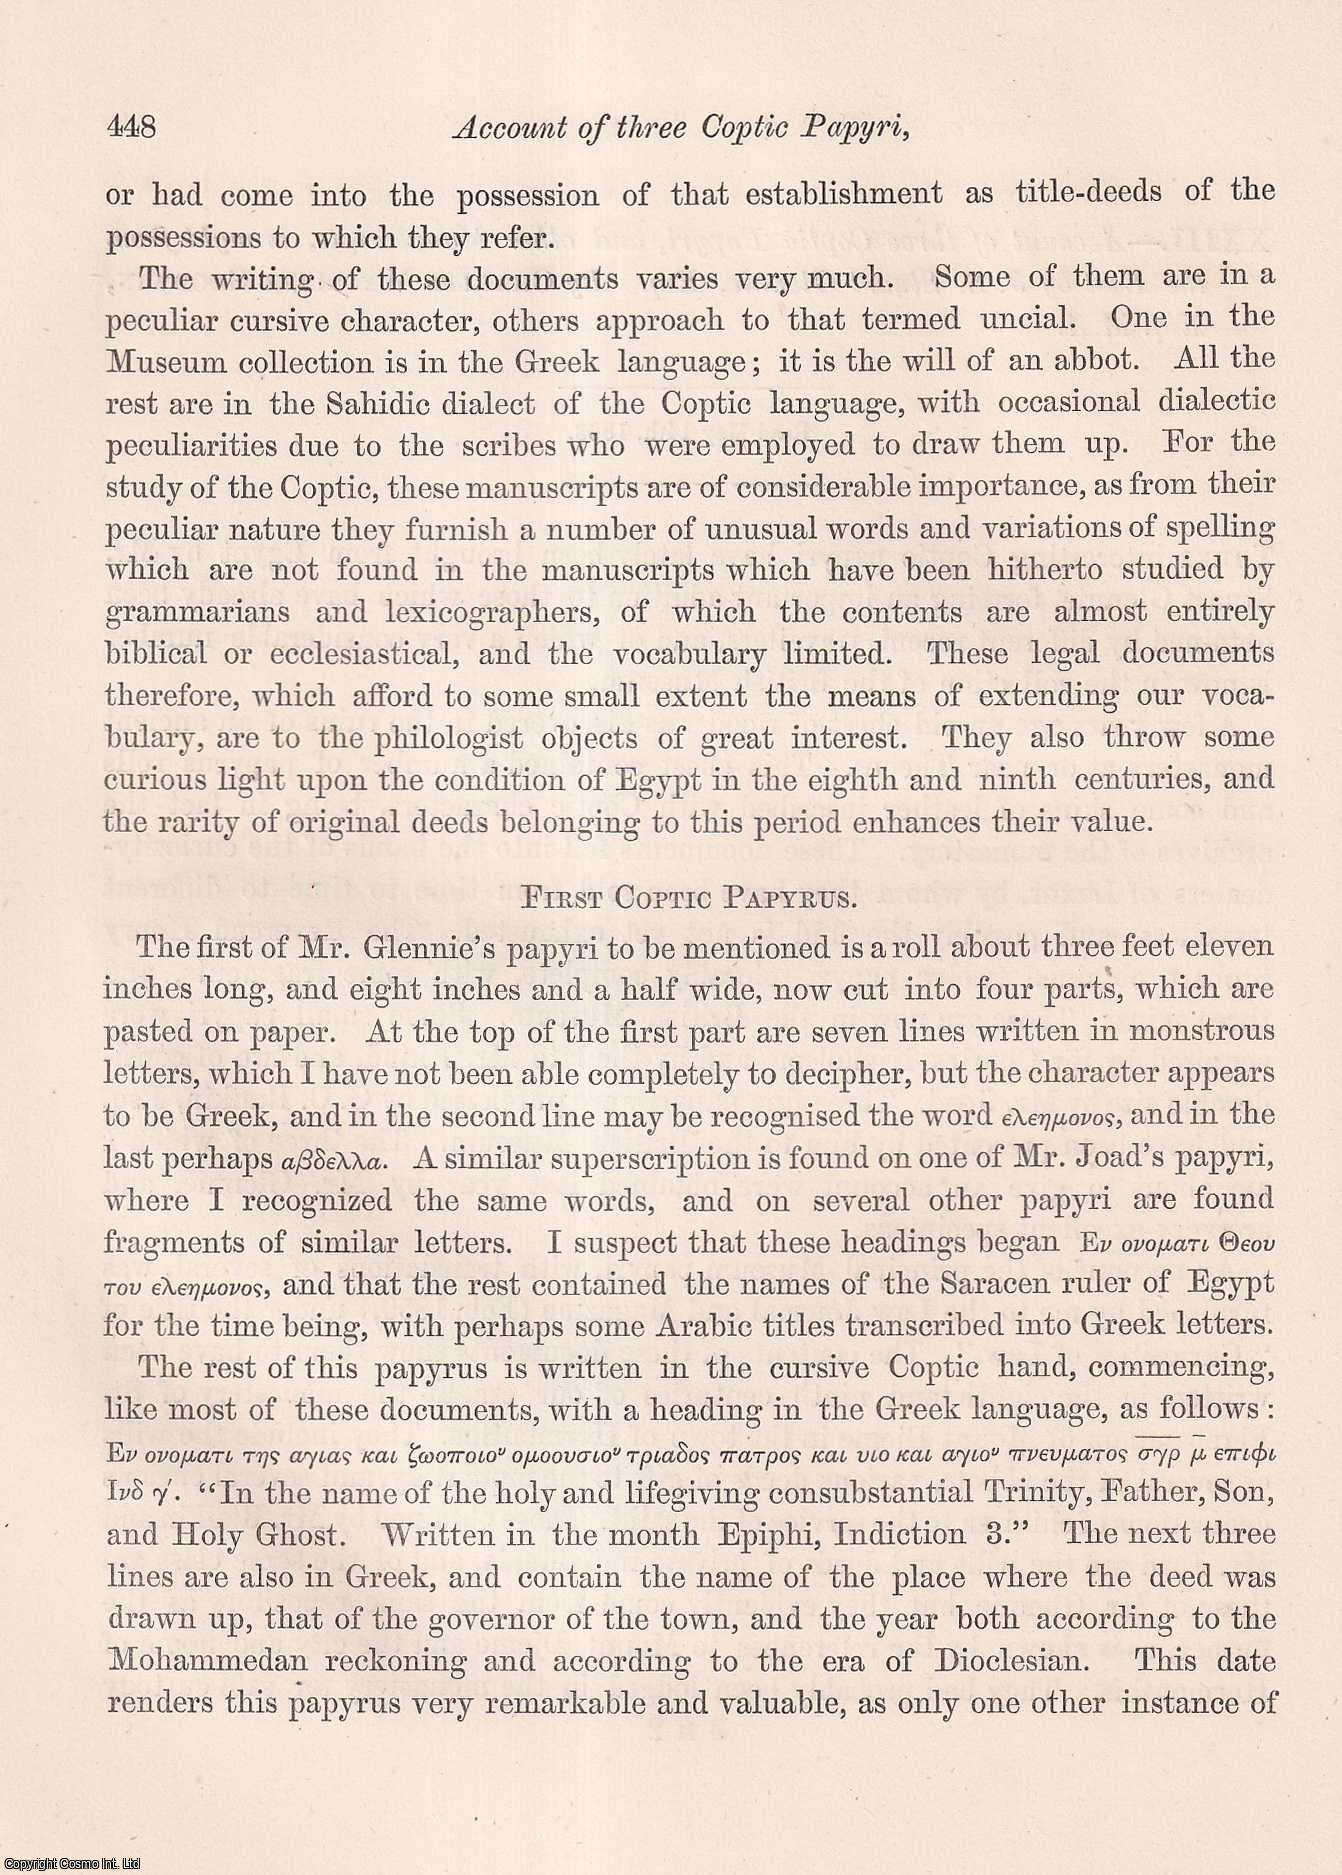 Charles Wycliffe Goodwin, Esq., M.A. - Account of three Coptic Papyri, and other Manuscripts, brought from the East by J.S. Stuart Glennie, Esq. An uncommon original article from the journal Archaeologia, 1863.